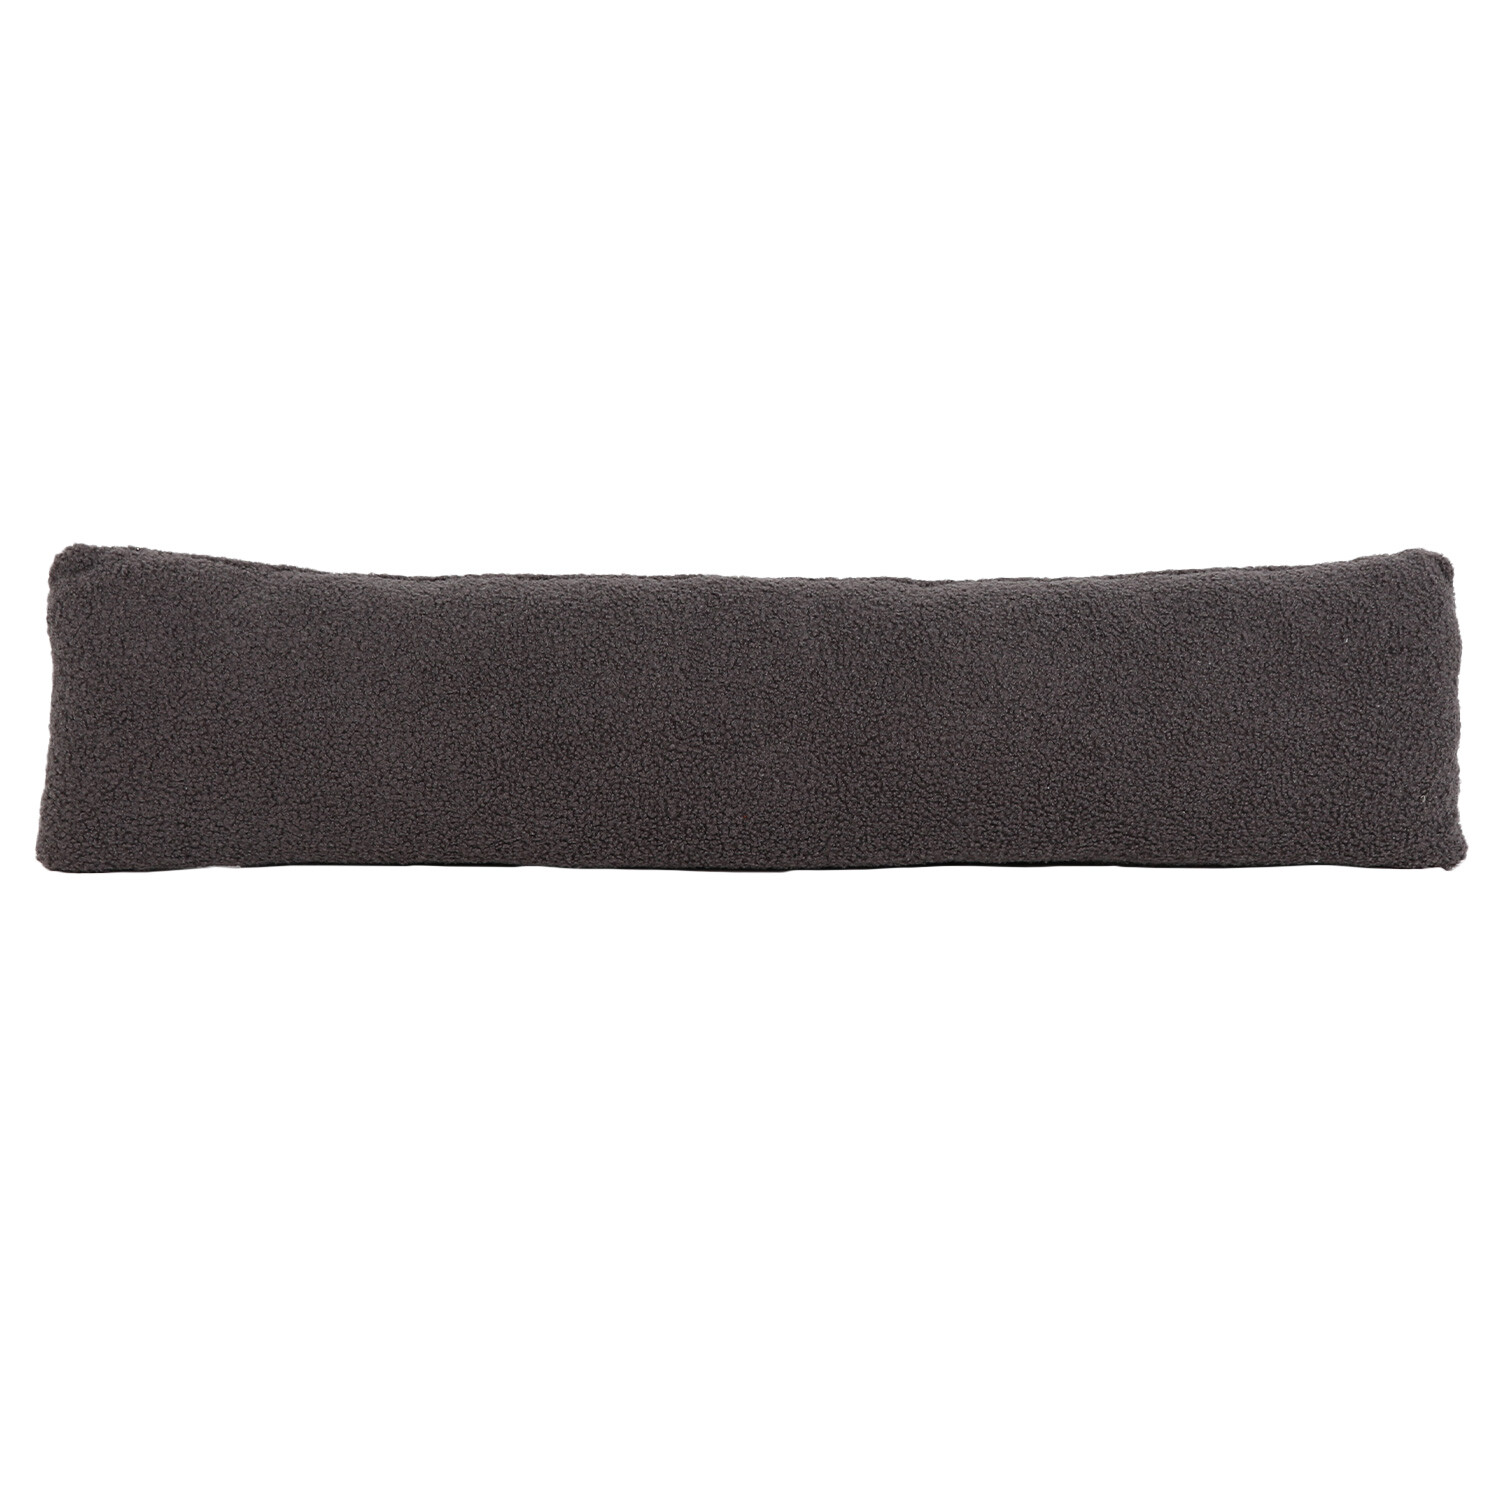 Charcoal Blake Draught Excluder Image 1